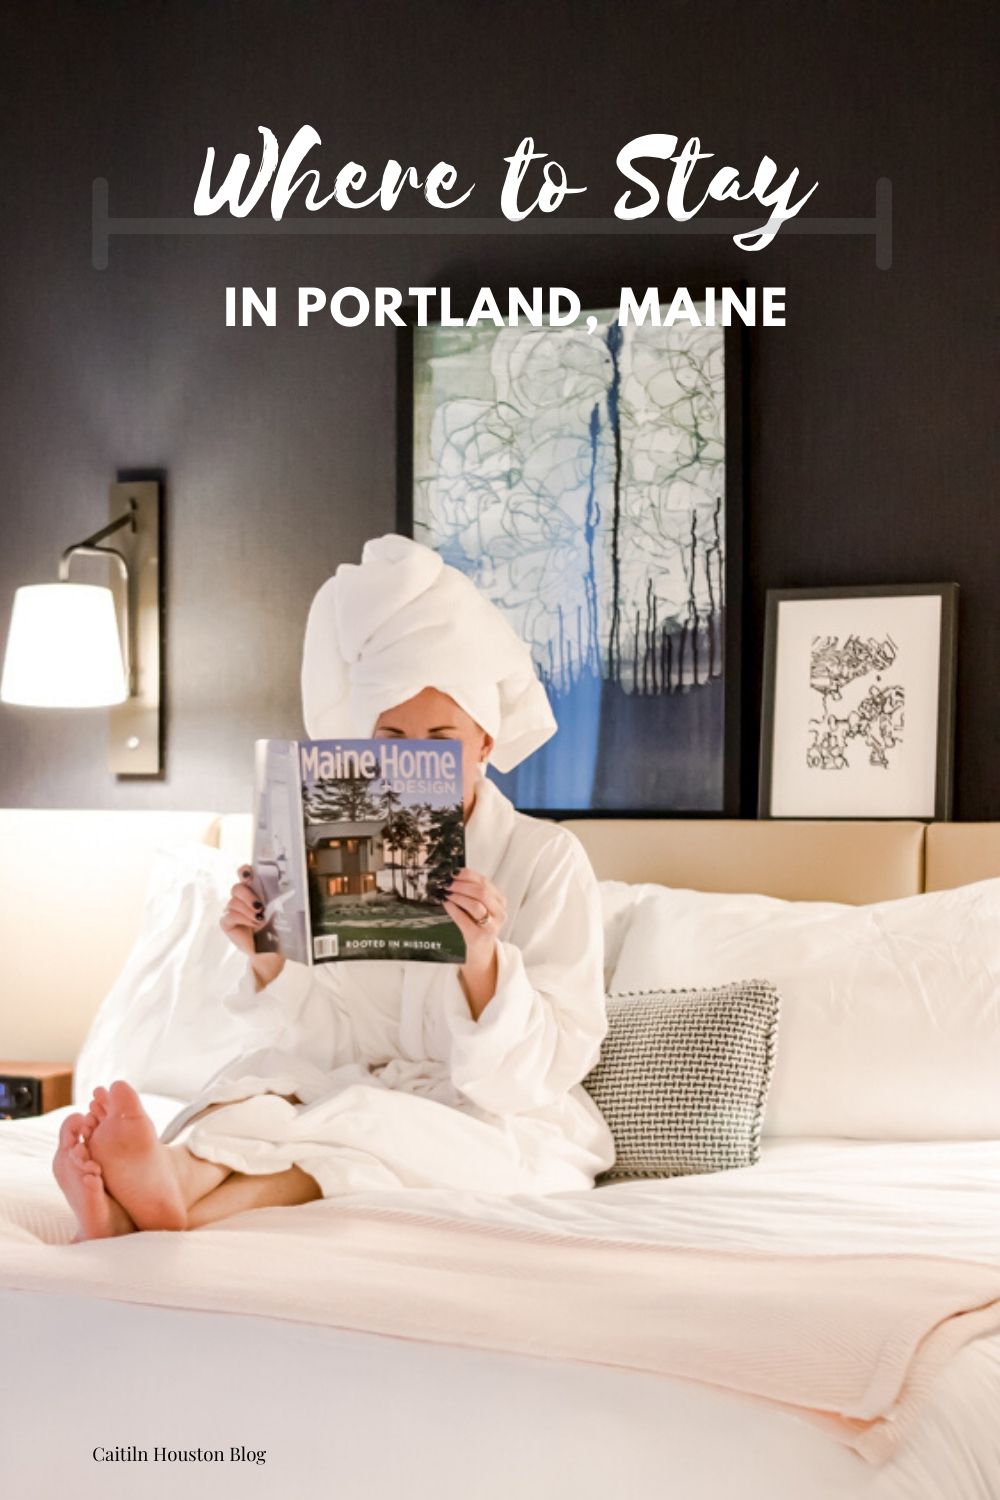 Portland Maine Travel Guide - What to do, where to eat, where to stay in Portland for a New England Getaway by Caitlin Houston 